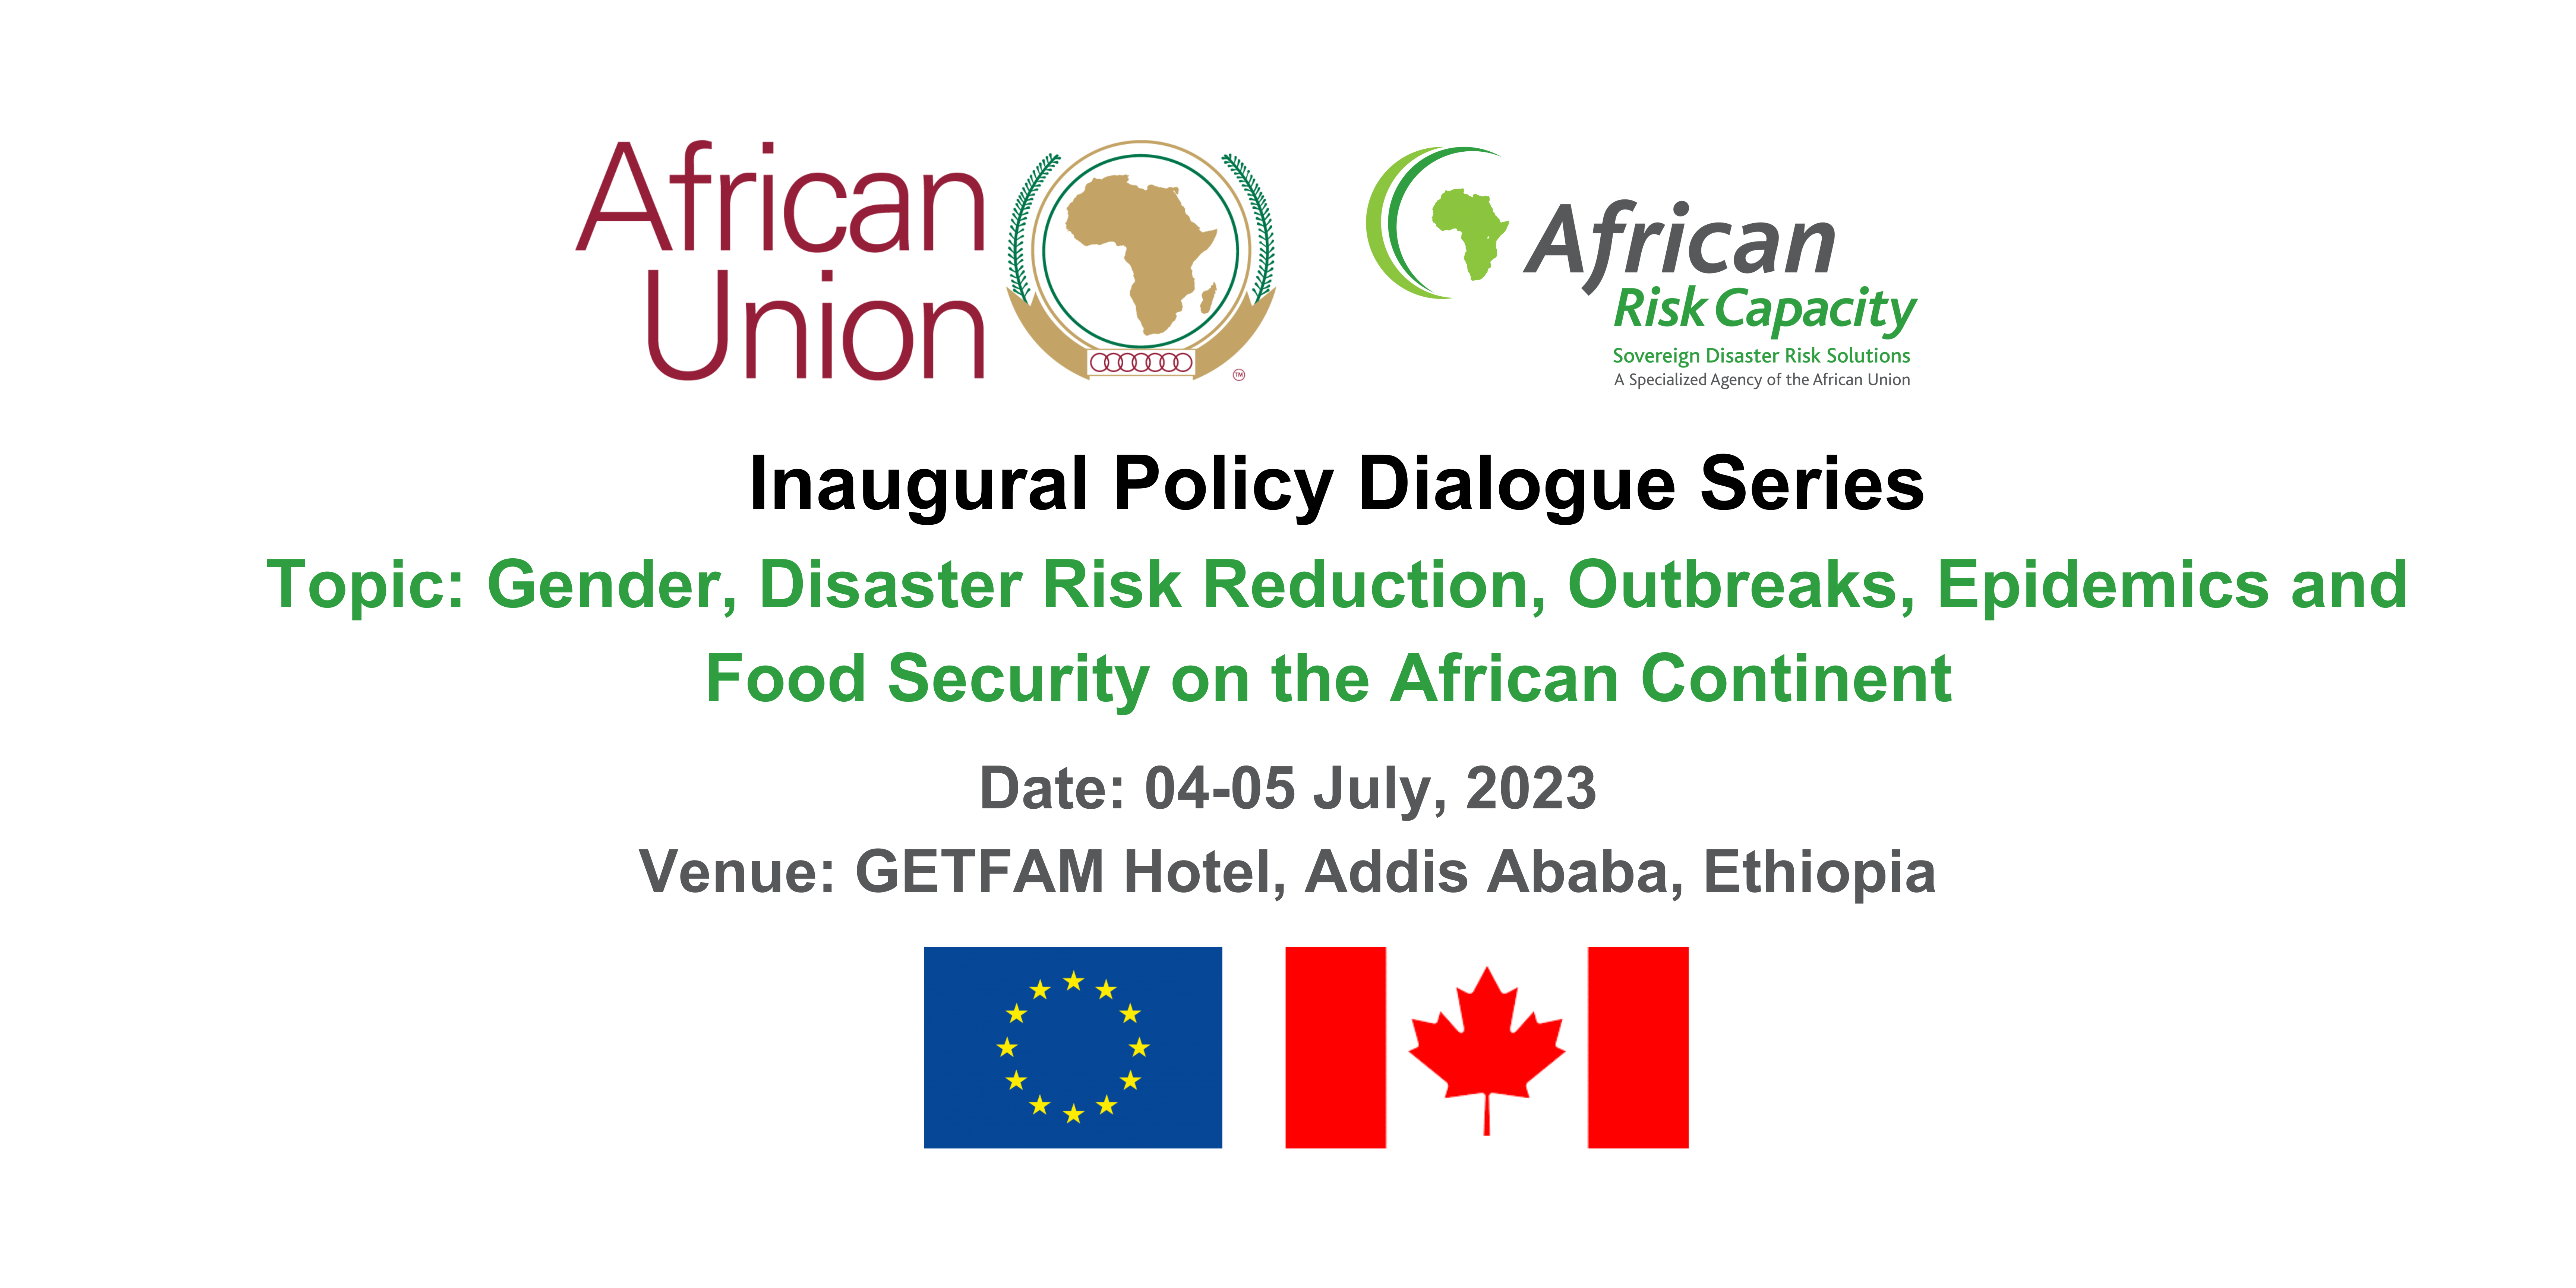 The AUC and the ARC are jointly organizing the inaugural session of the Policy Dialogue series on Gender, Disaster Risk Reduction, Outbreaks, Epidemics and Food security. The inaugural session aims to sustainably engage policy and decision makers on the African continent on the need to strengthen policy measures for a more significant impact on matters of mainstreaming gender equality and women and youth empowerment issues in the Disaster Risk Management and Financing, Health emergencies and food security l